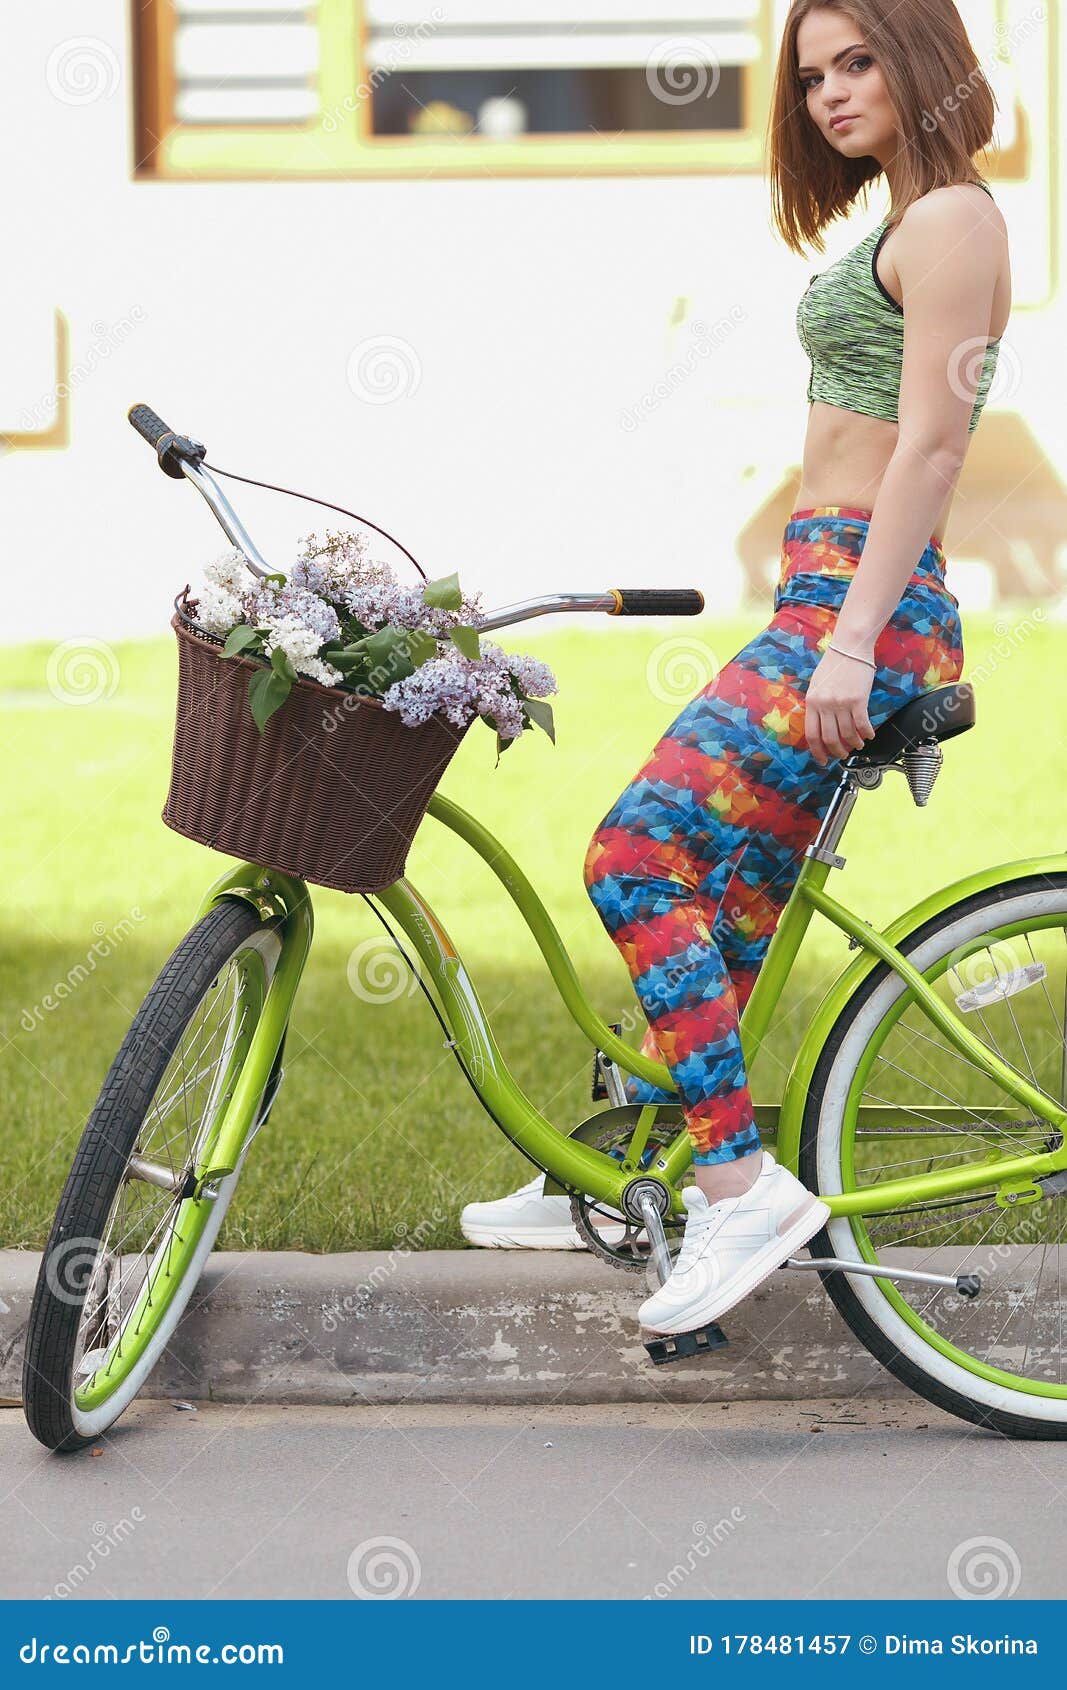 https://thumbs.dreamstime.com/z/girl-leggings-top-engaged-sports-cycling-spring-resting-riding-bicycle-178481457.jpg